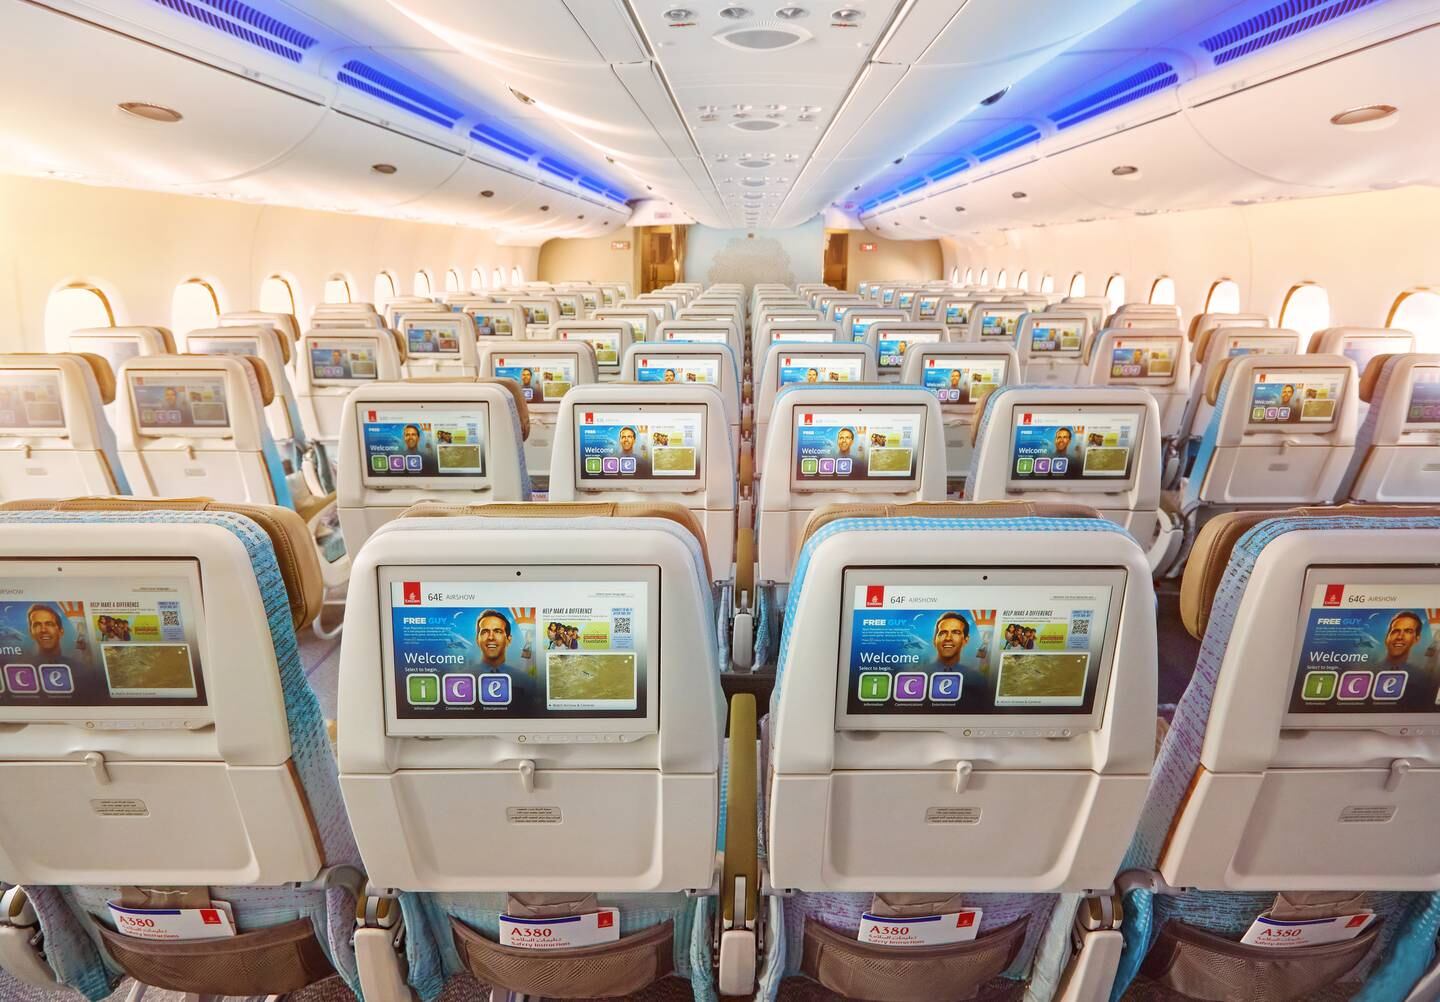 Emirates has won Skytrax World’s Best Inflight Entertainment accolade every year since 2005. Photo: Emirates